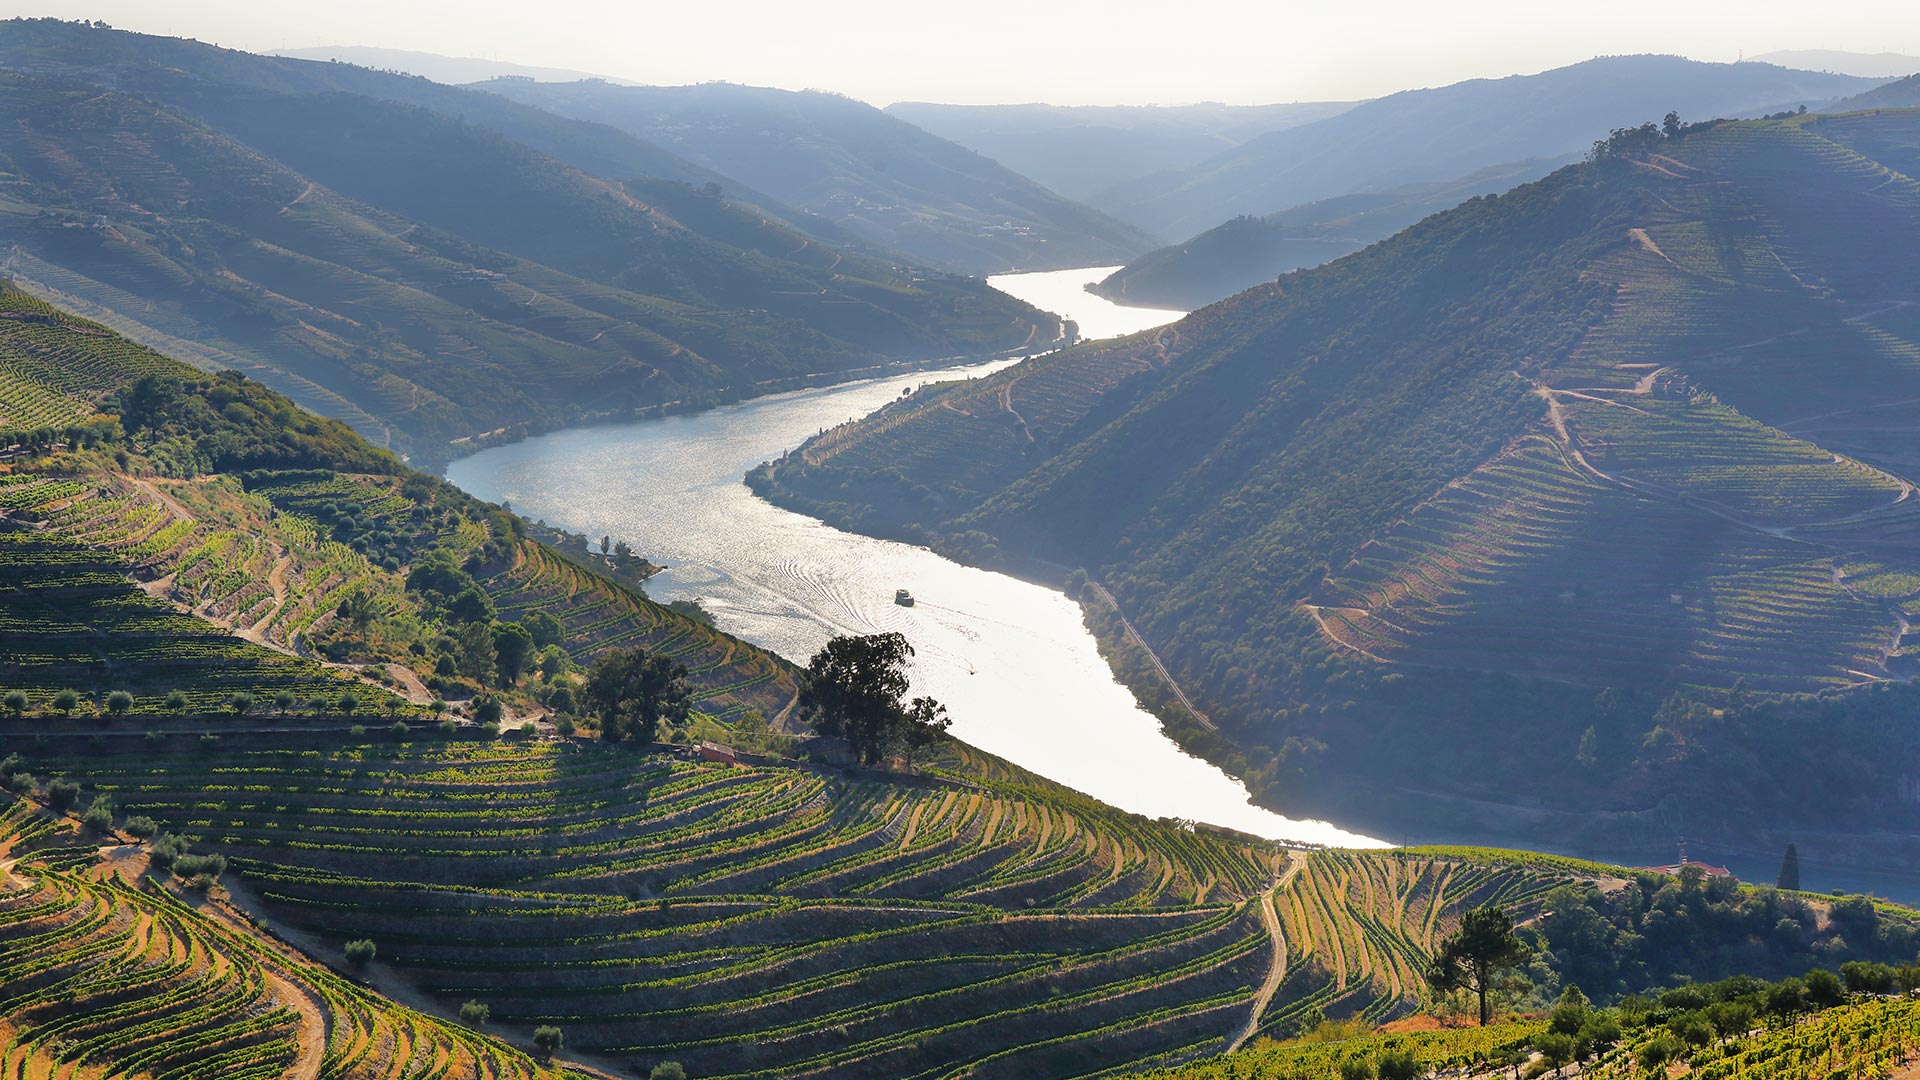 The wine region of the Douro valley in Portugal